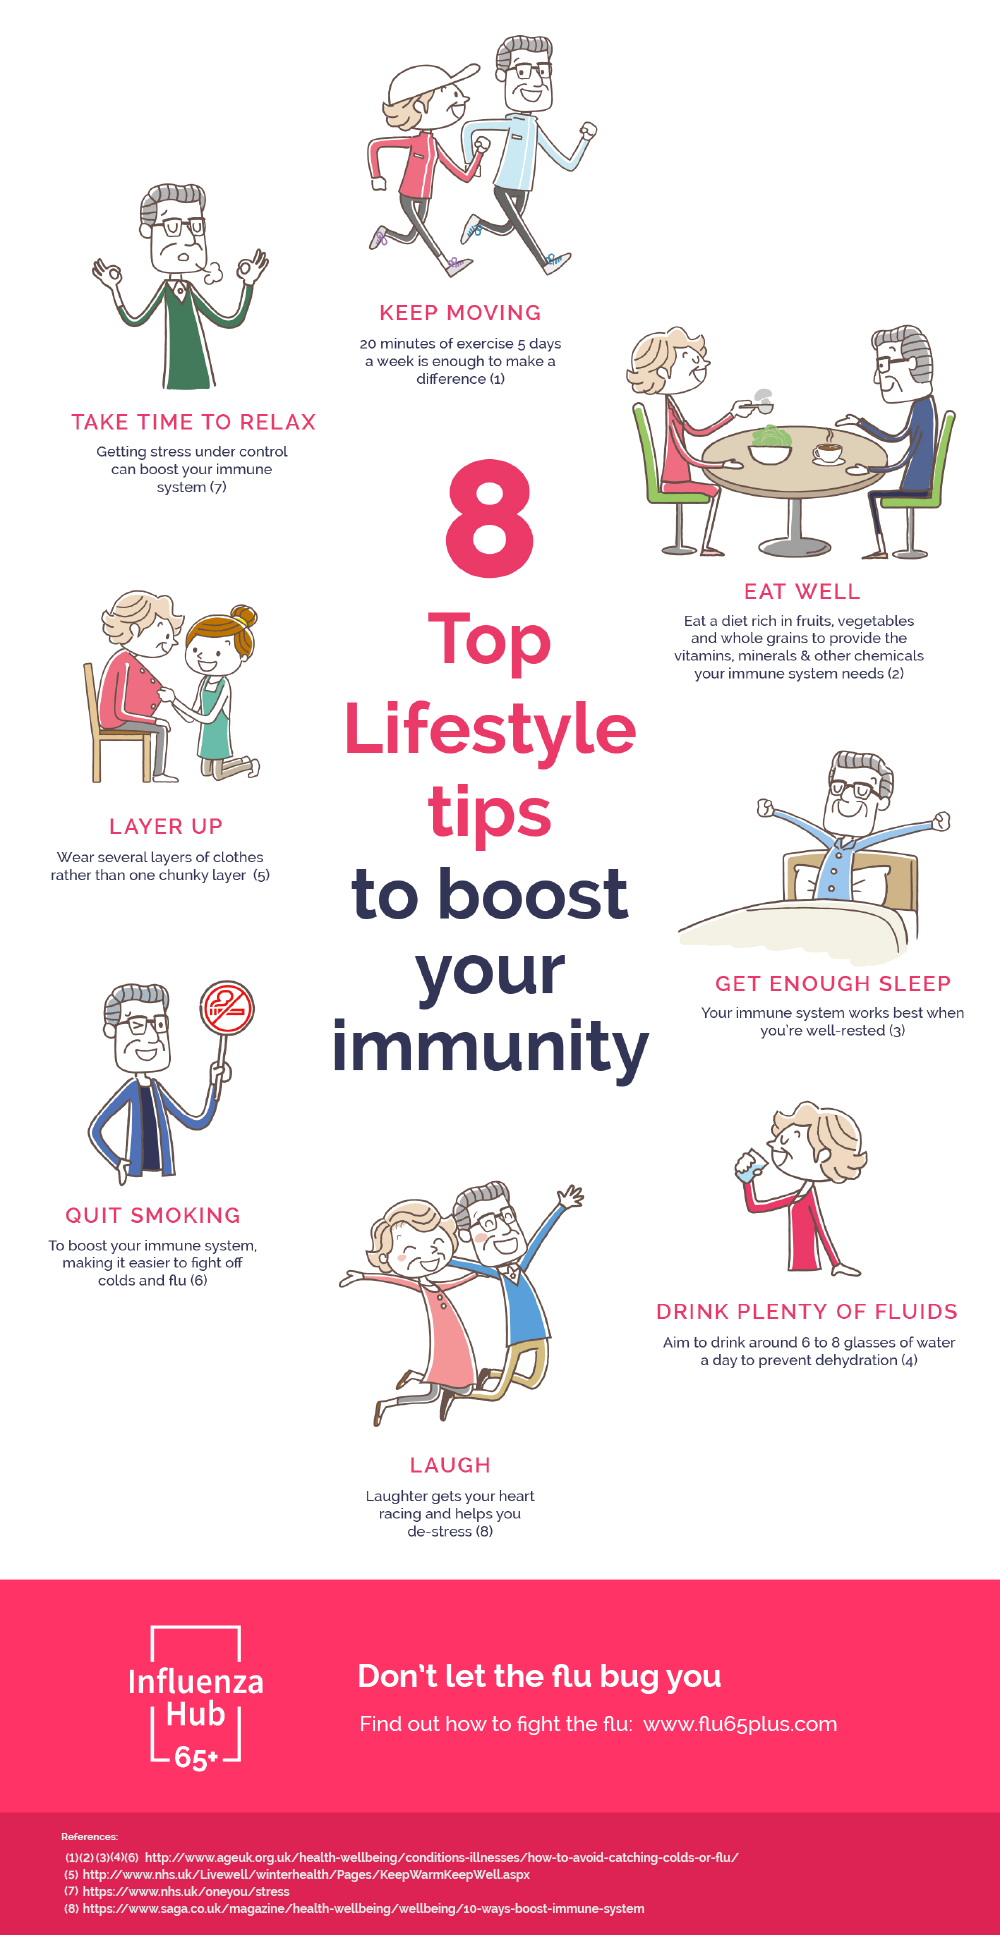 Immune system: 8 lifestyle tips to boost your immunity